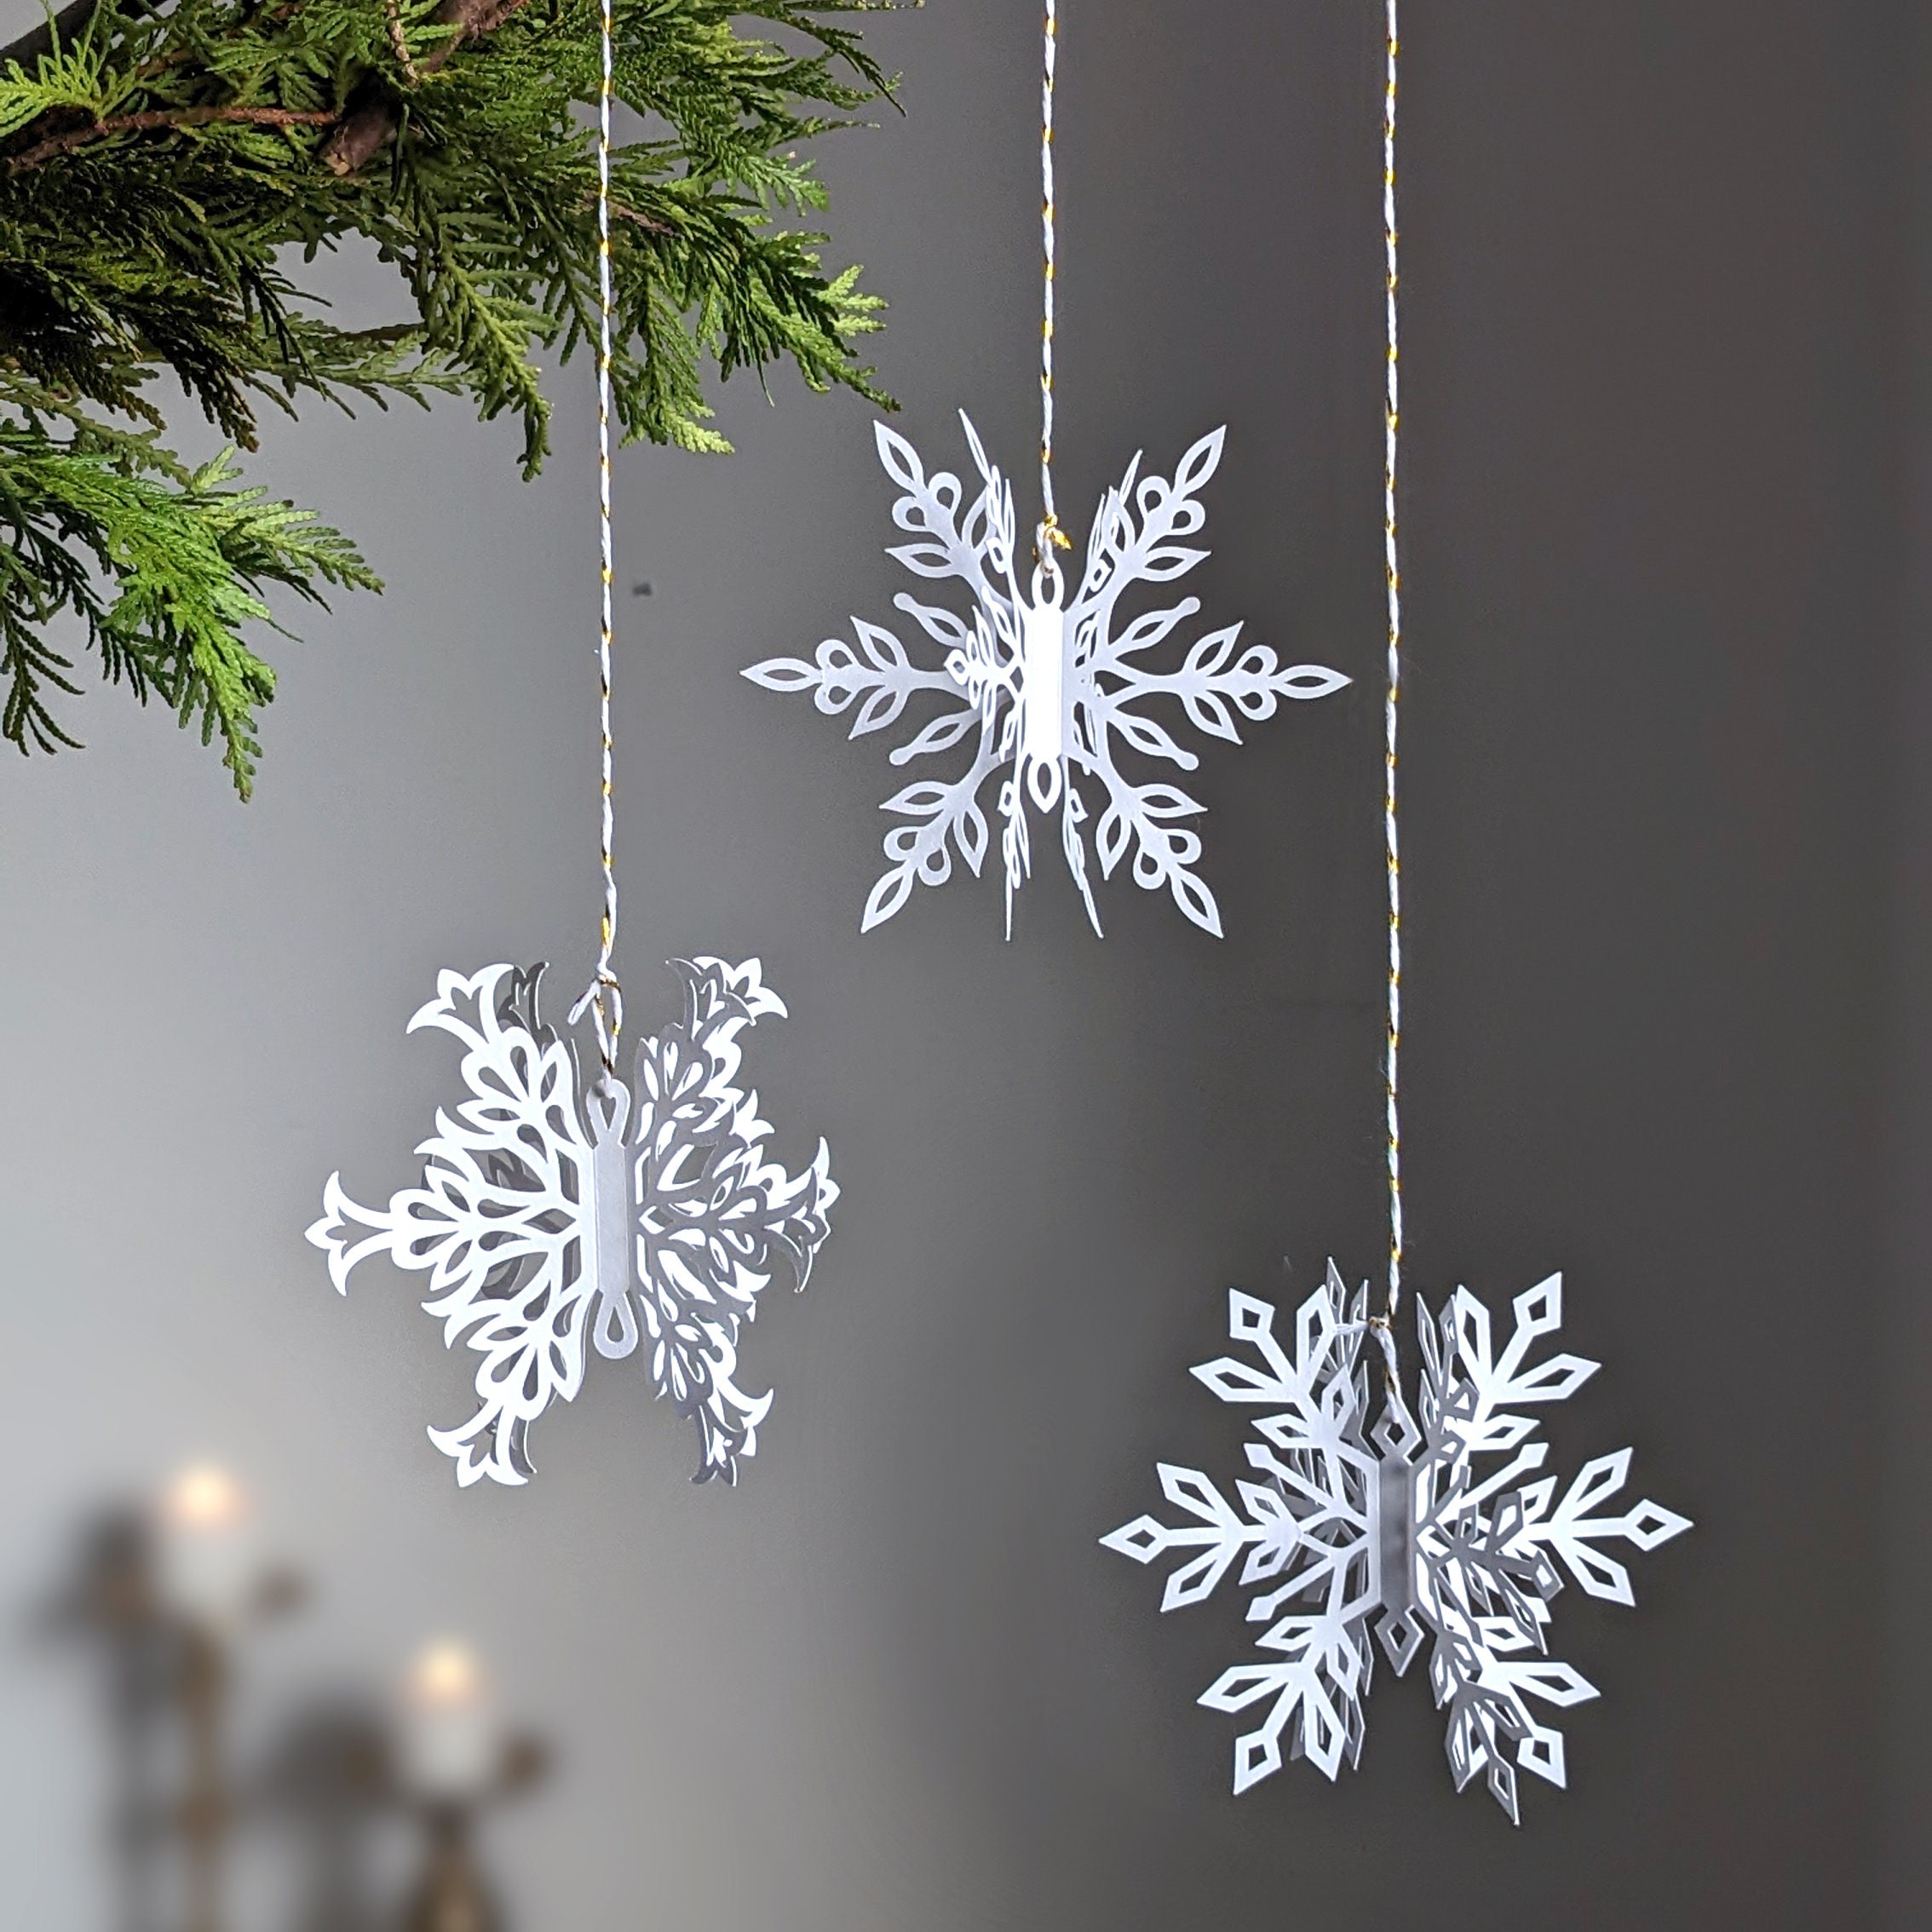 LINDOO winter snowflake hanging decorations - 3d large silver snowflakes  paper hanging garland for christmas winter wonderland